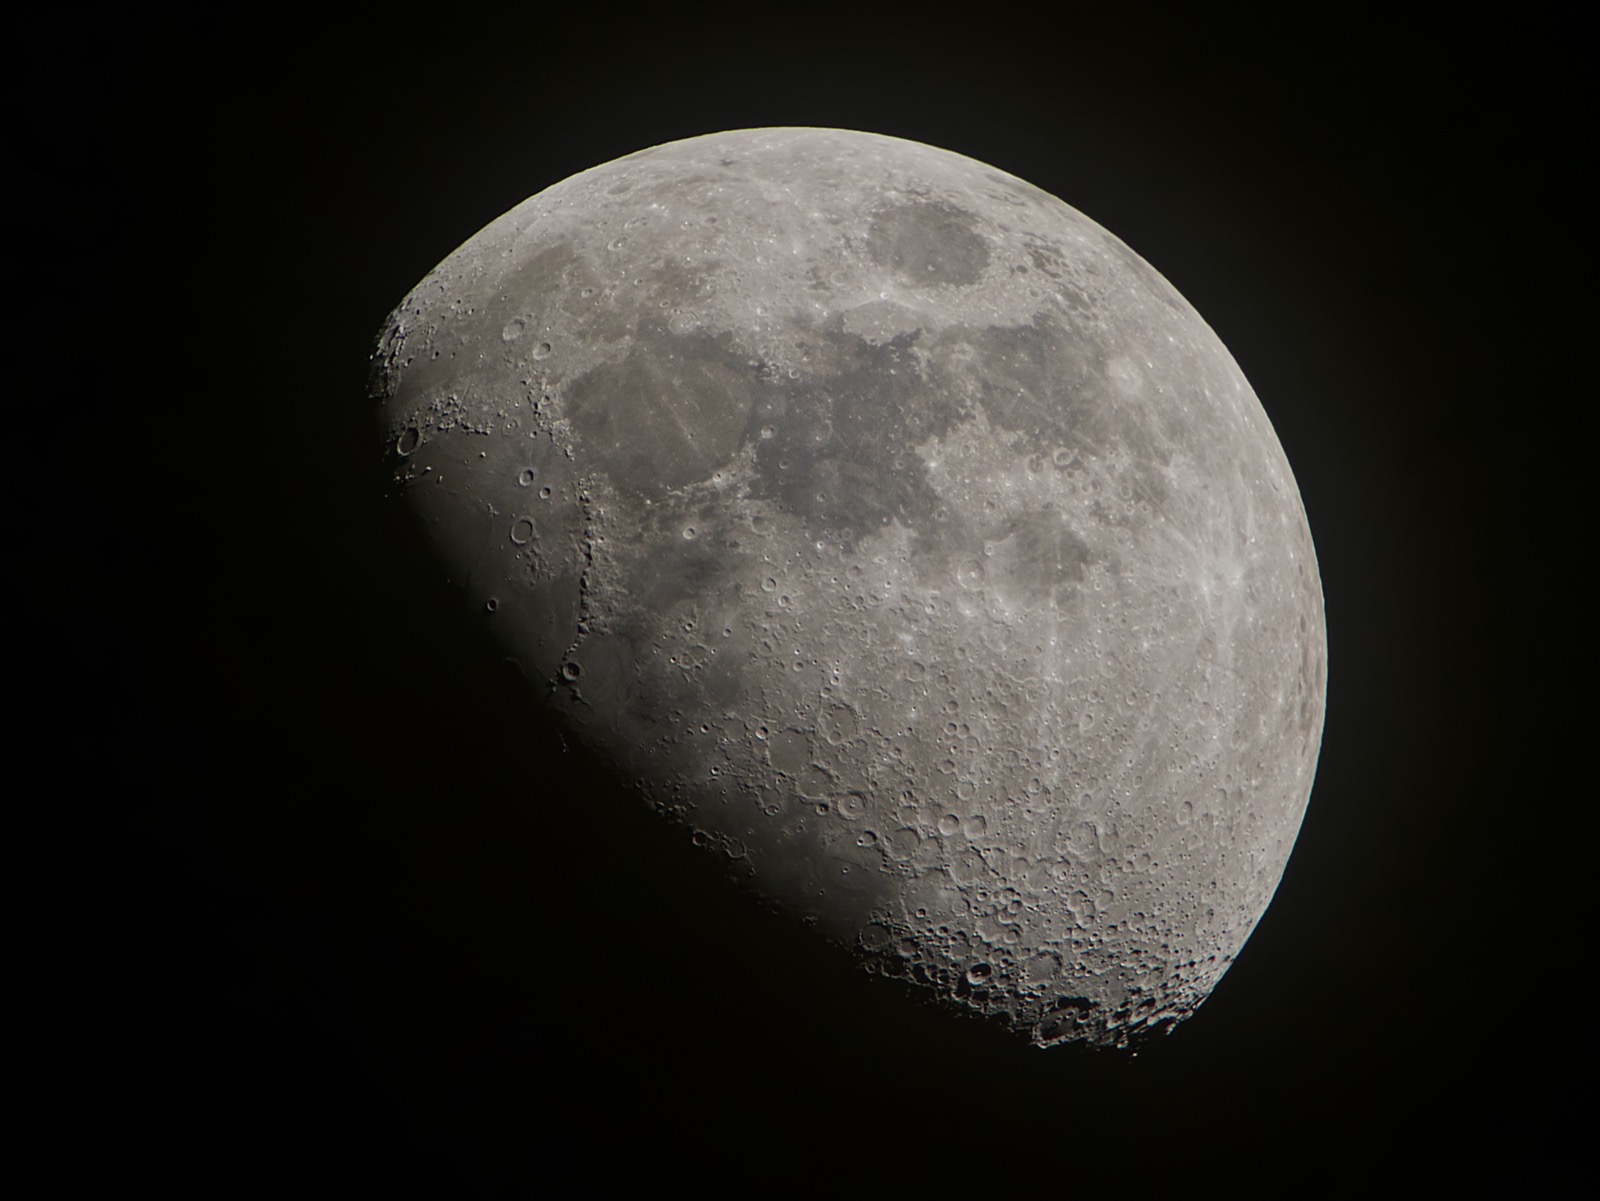 Processed this from RAW in Affinity Photo 2. Moon.